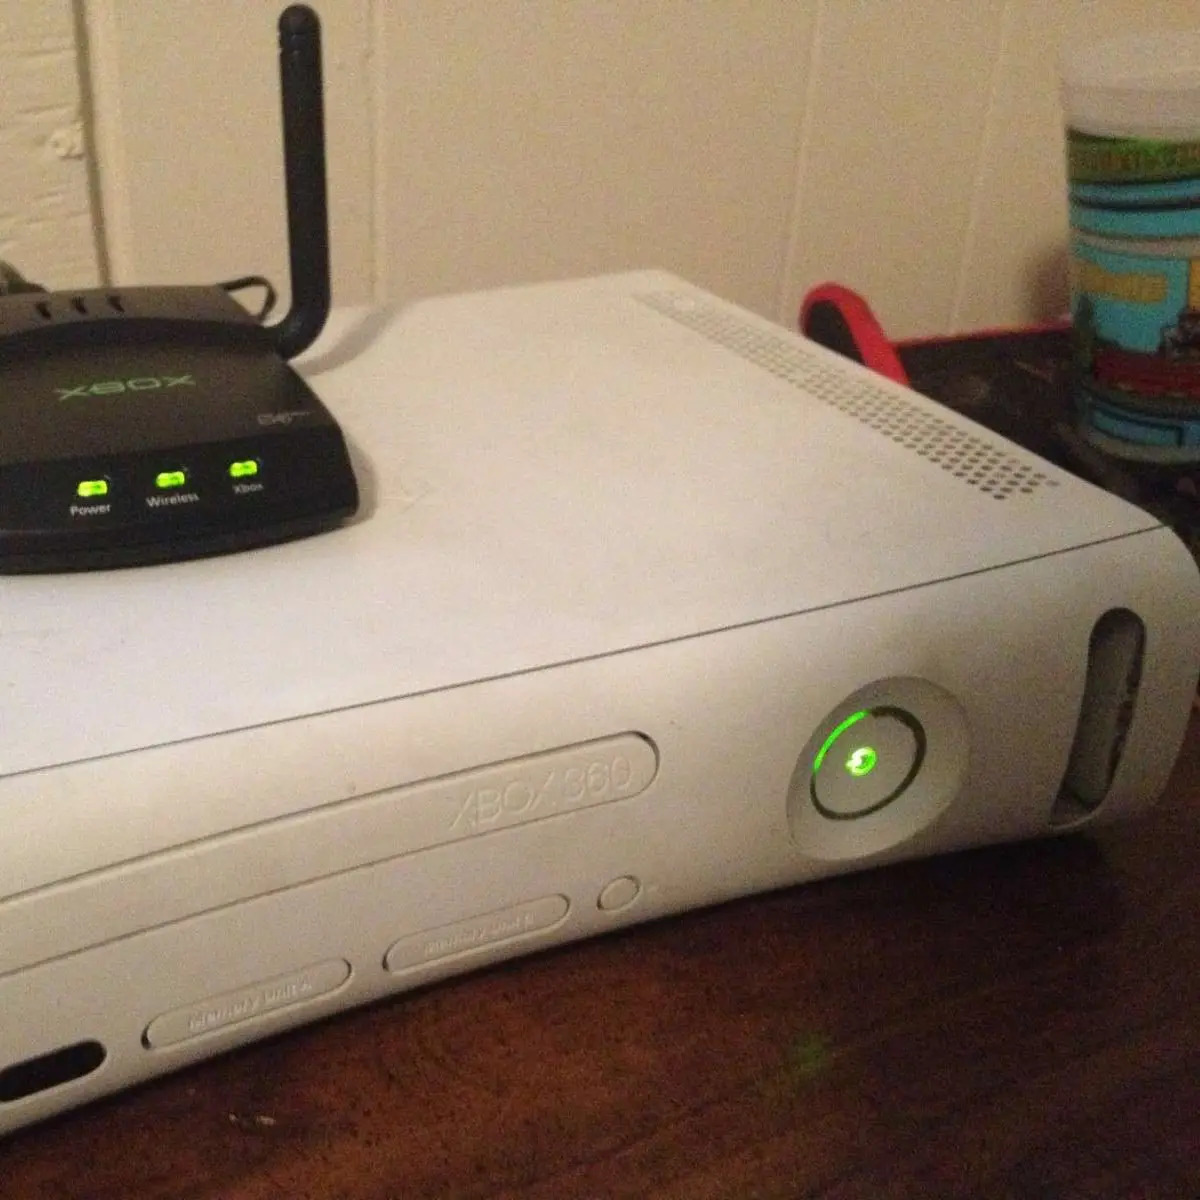 connecting-xbox-360-to-hotspot-step-by-step-guide